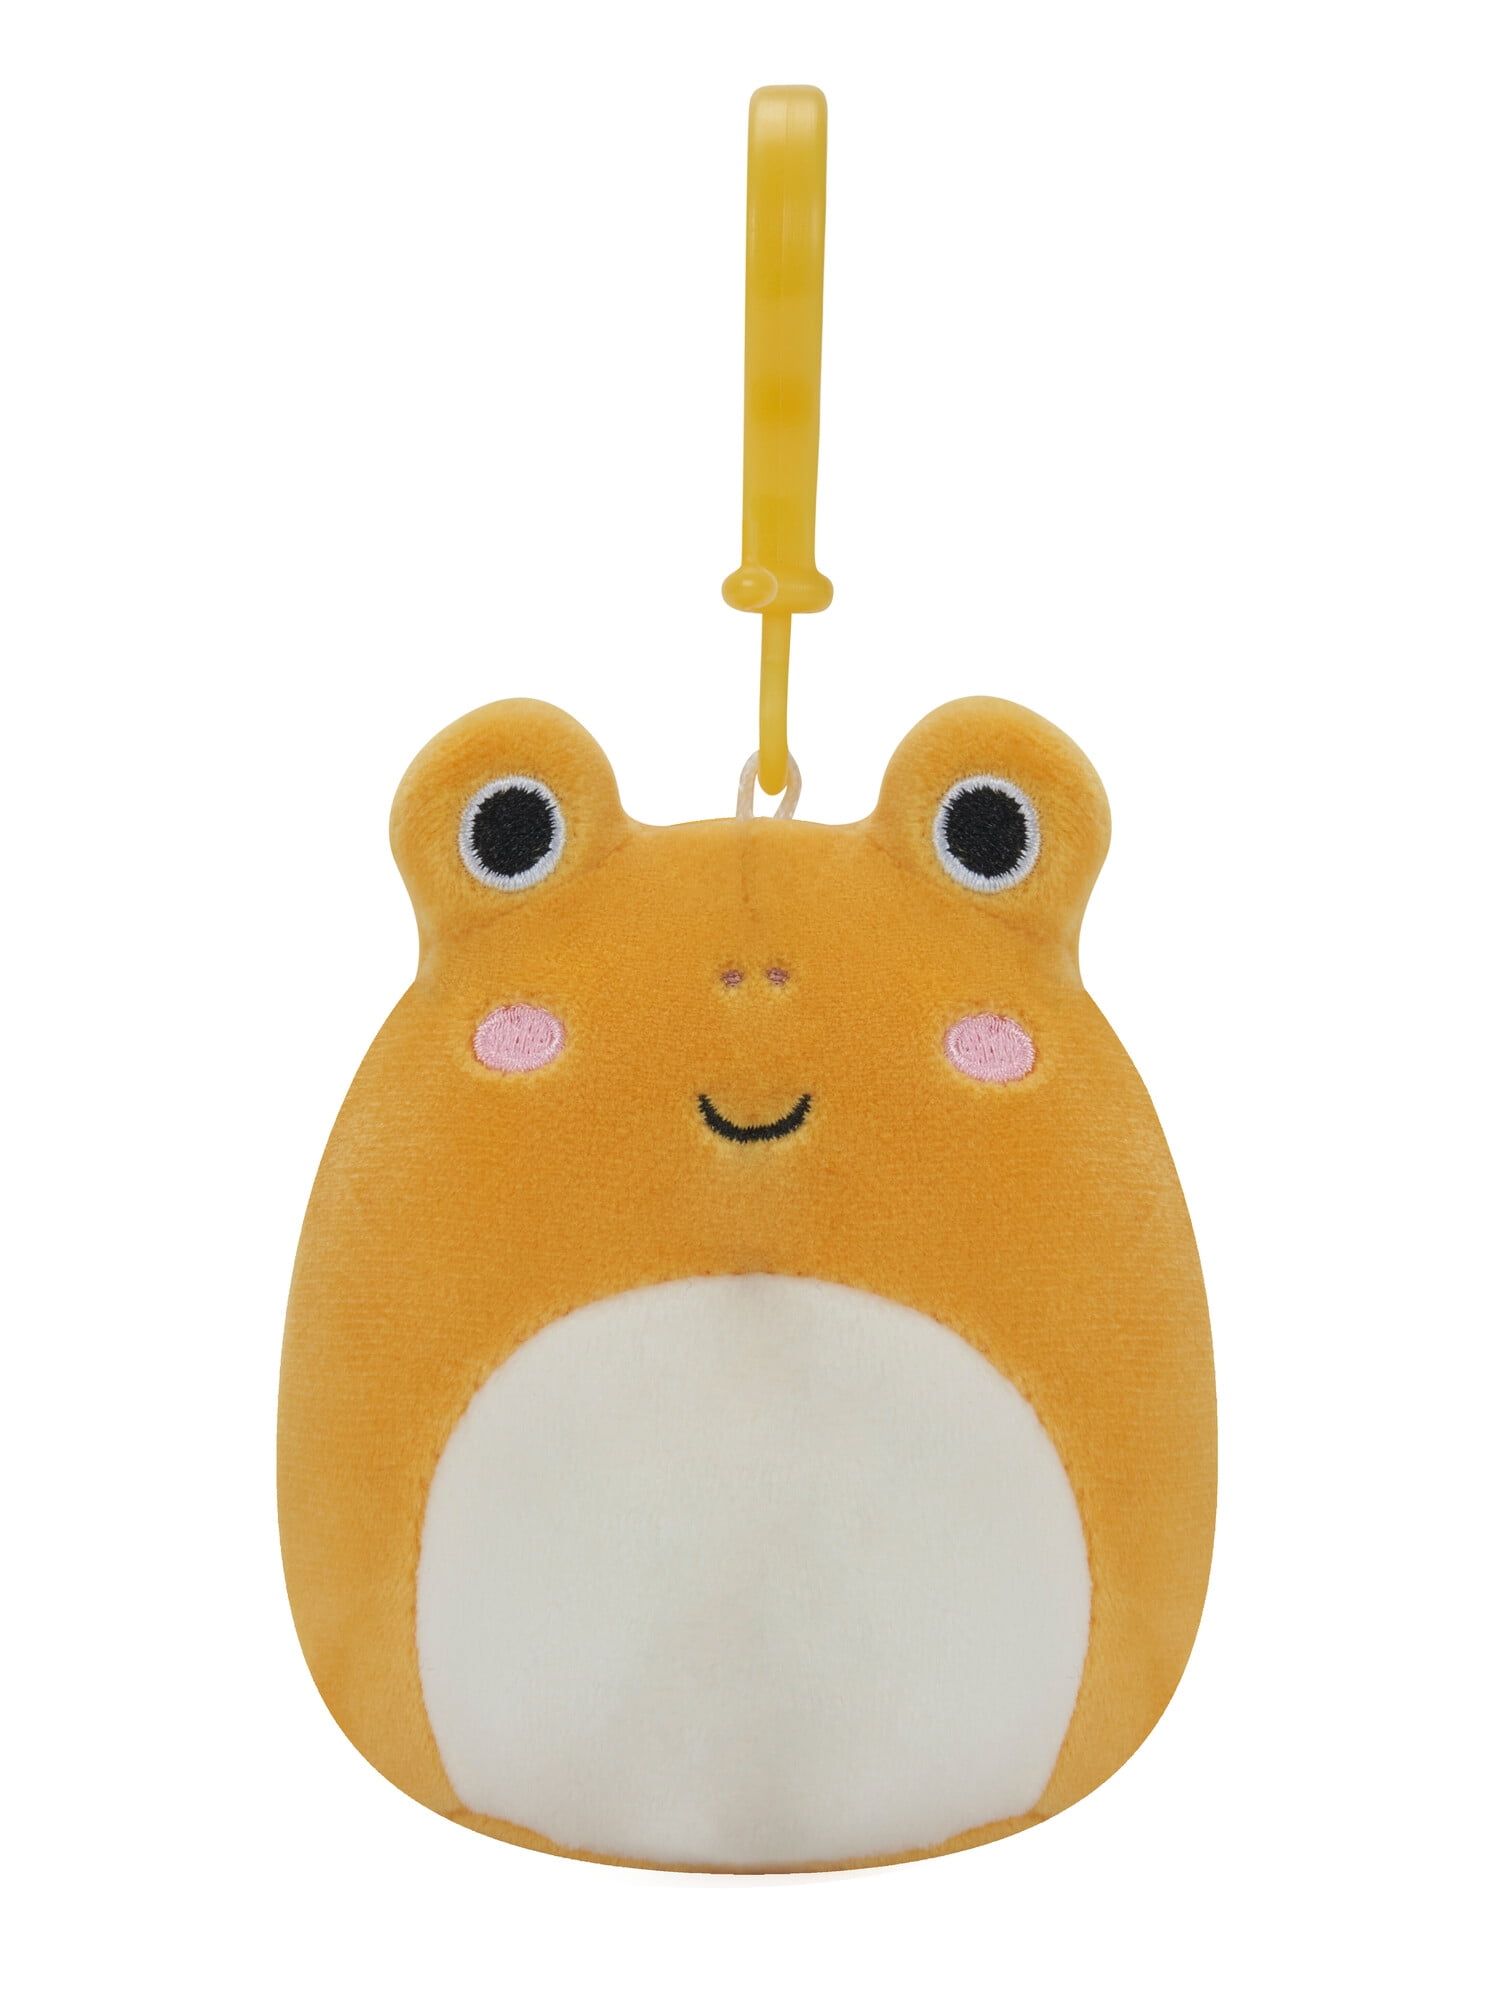 Squishmallows Official Plush 3.5 inch Yellow Toad - Child's Ultra Soft  Stuffed Plush Toy